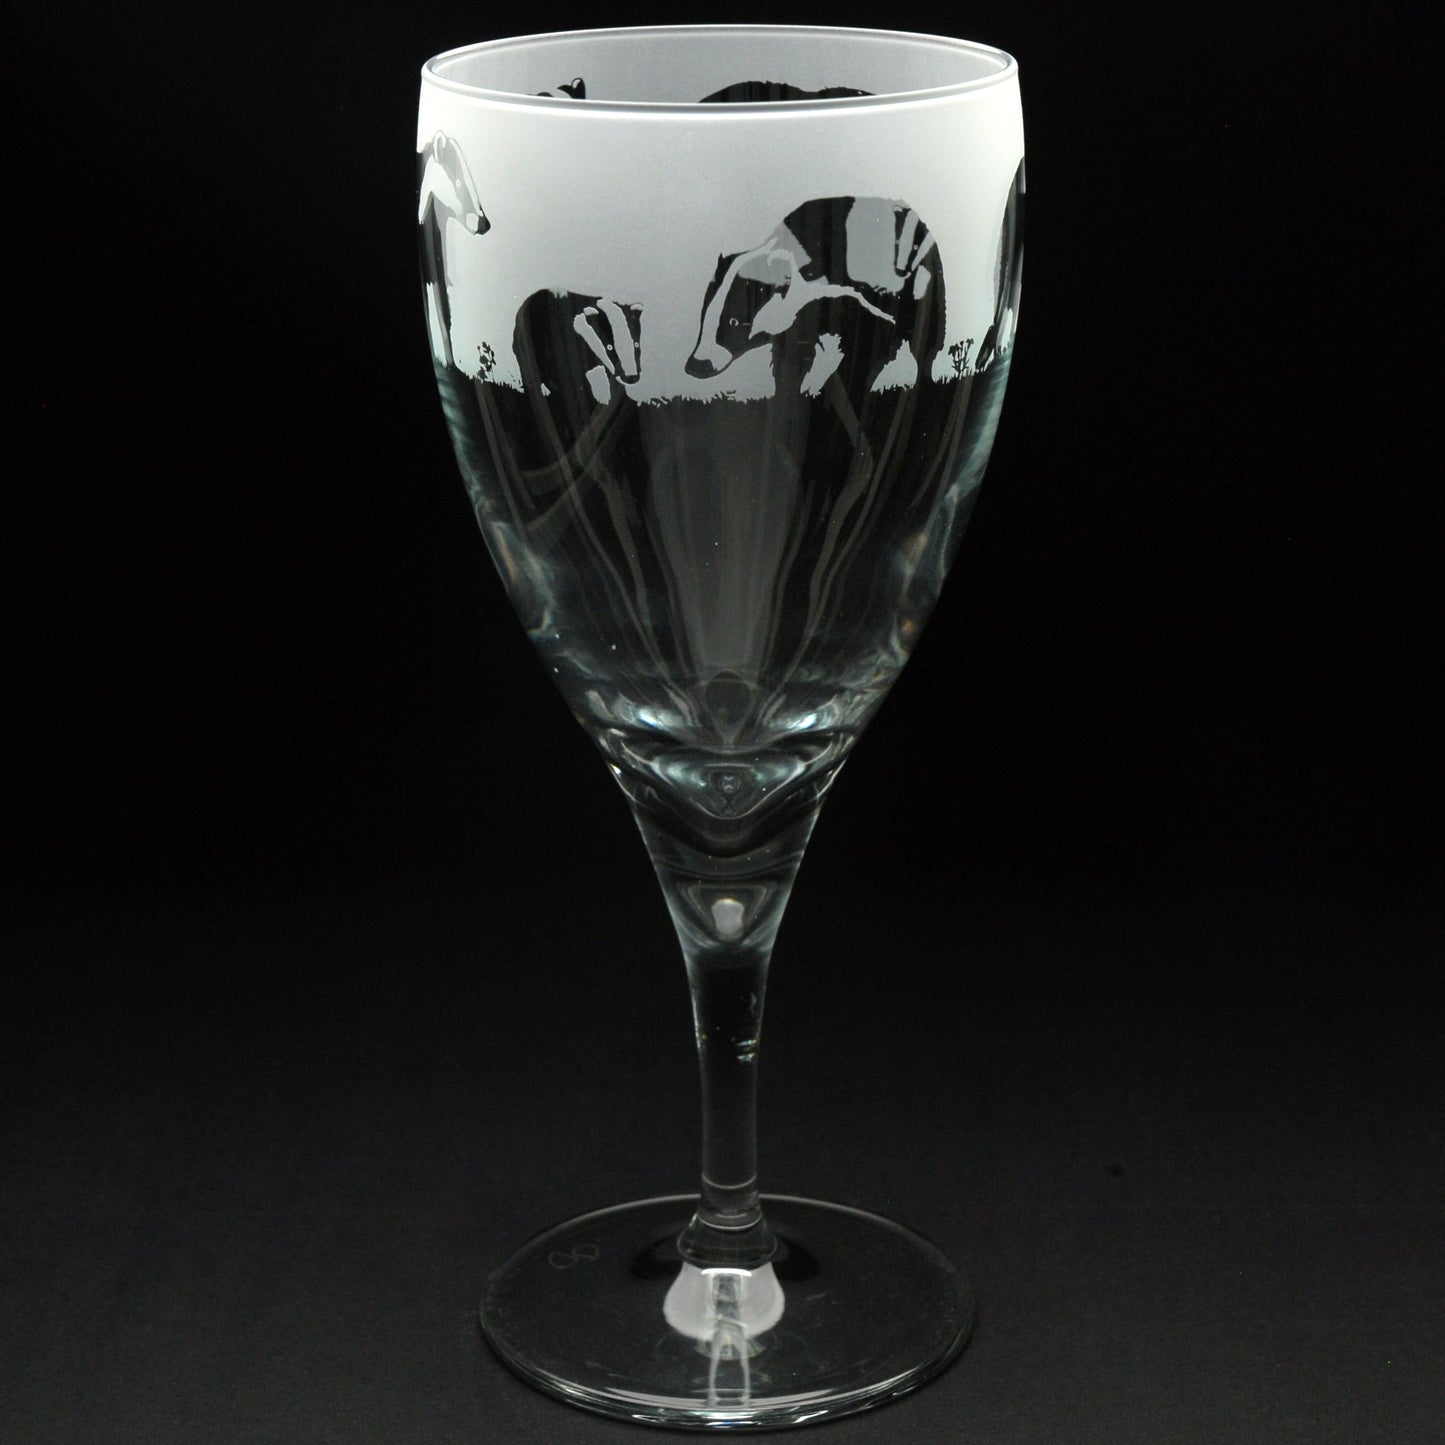 Badger Crystal Wine Glass - Hand Etched/Engraved Gift